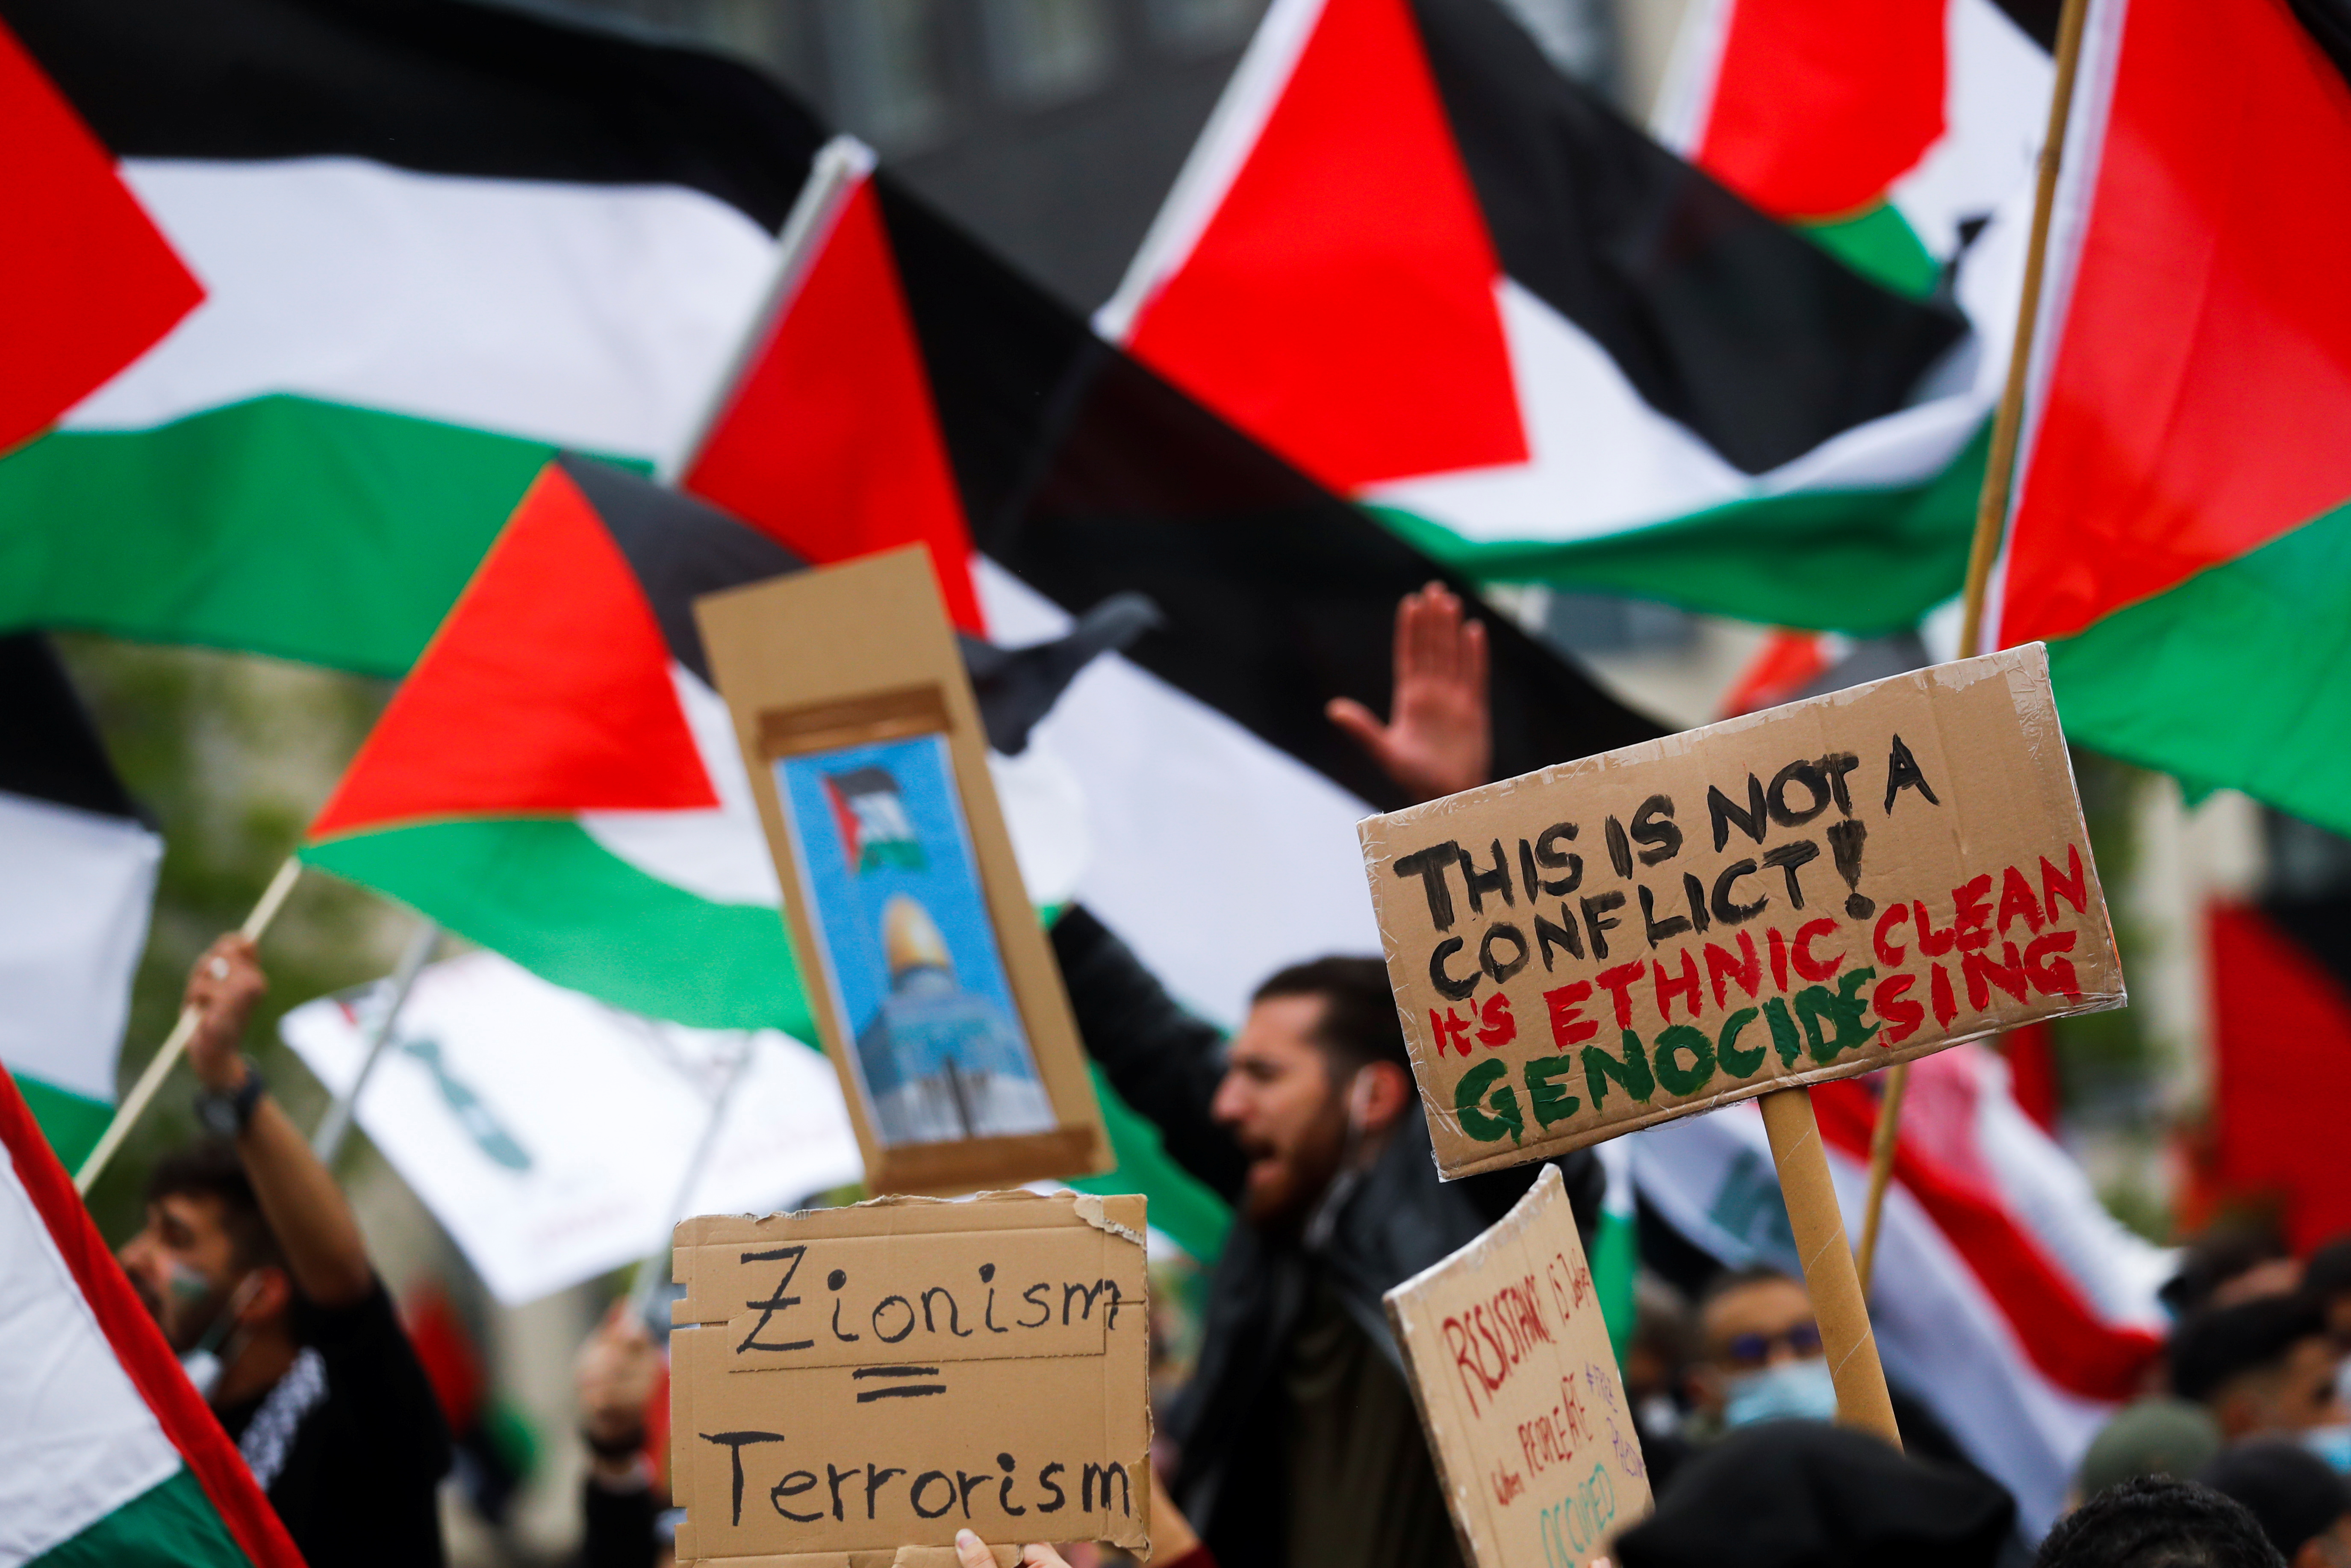 People attend a demonstration to mark the Nakba and in support of Palestinians, in Frankfurt, Germany May 15, 2021. REUTERS/Kai Pfaffenbach